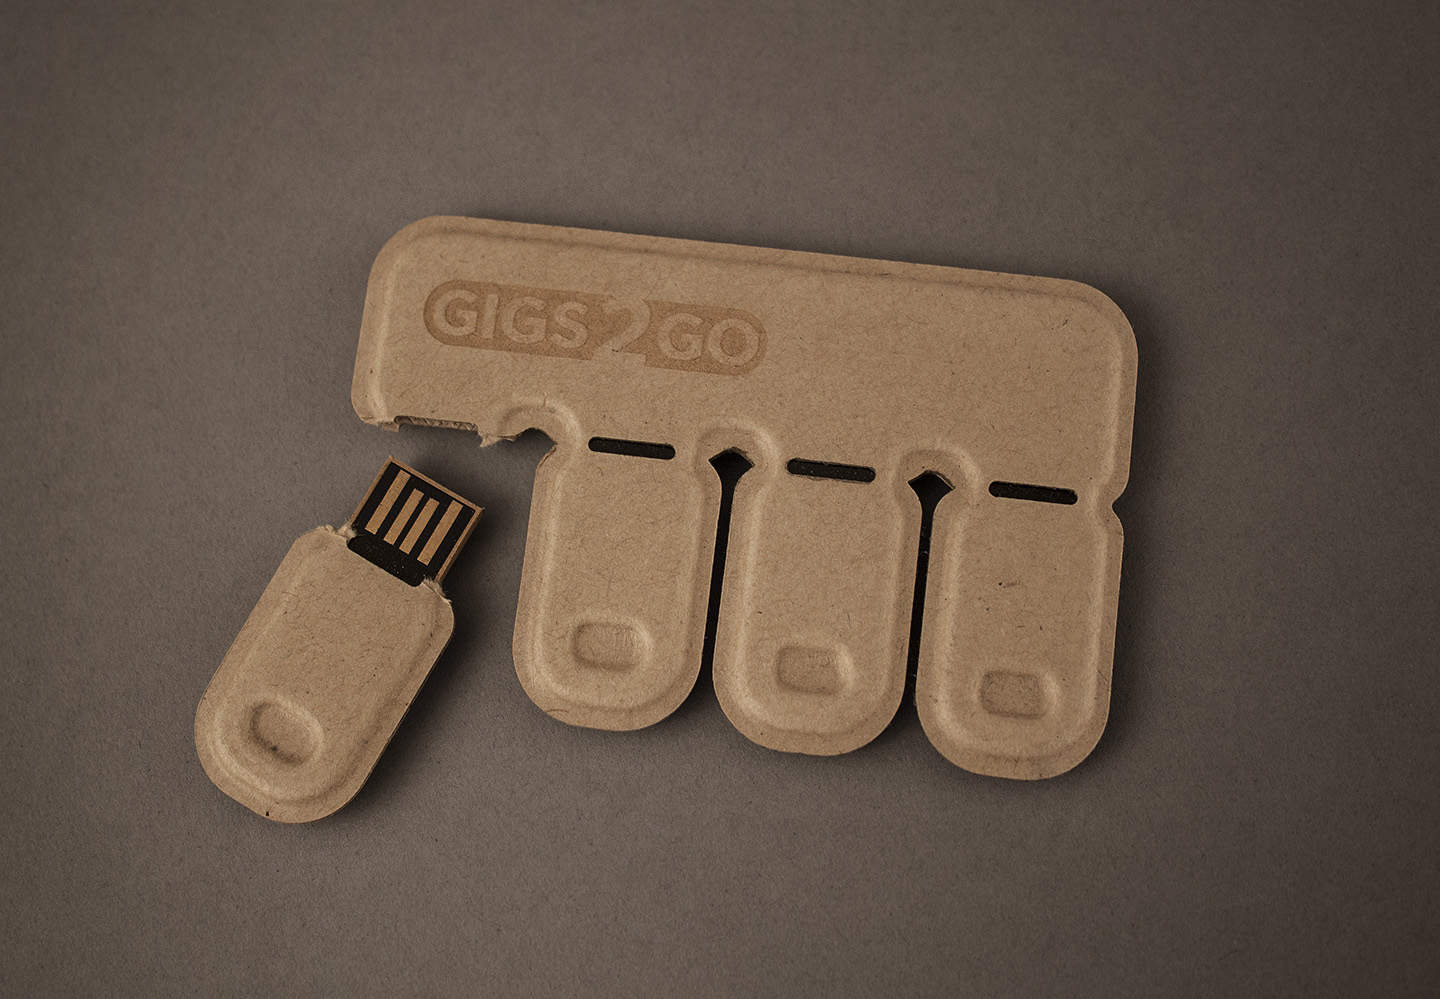 Gigs 2 Go Flash Drive Pack Cool Stuff to Buy